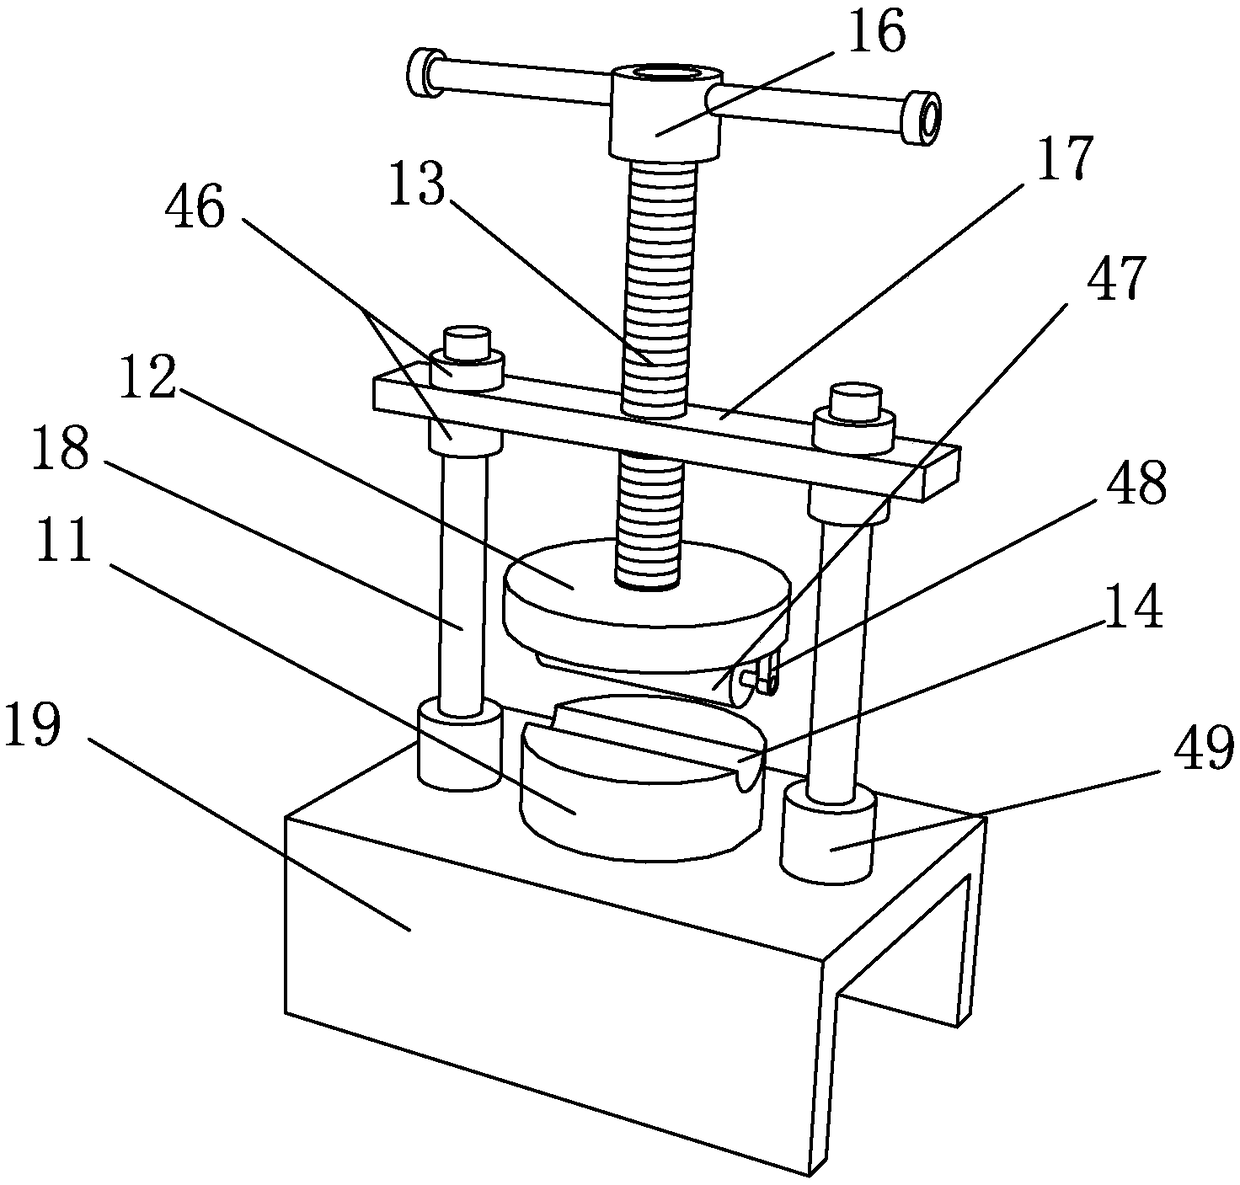 Yarn guiding device for textile product production